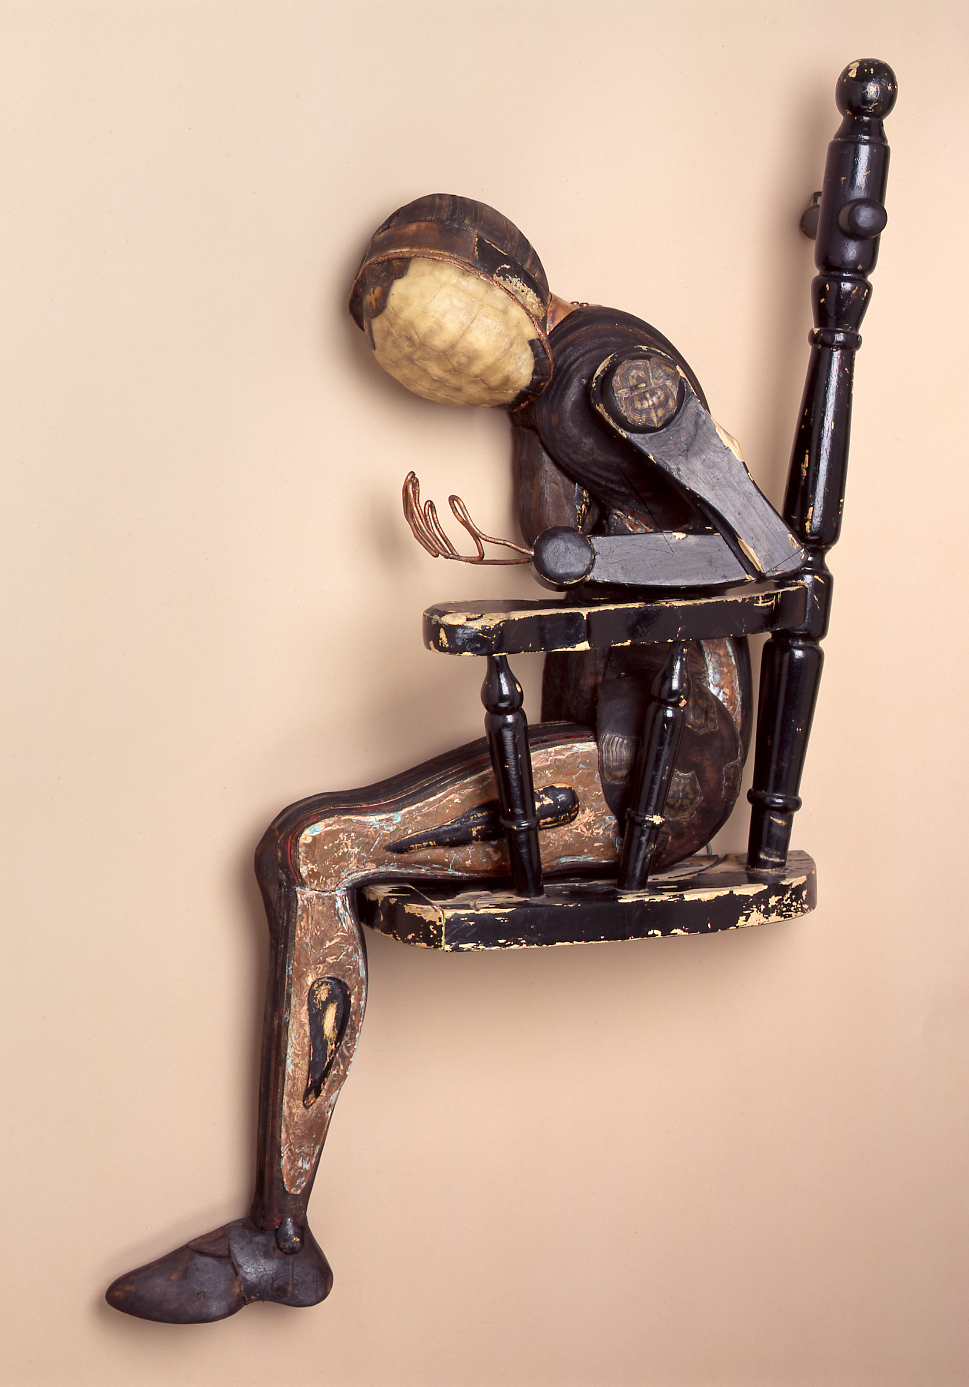 found objects, wall assemblage, mixed media, figurative, sculpture